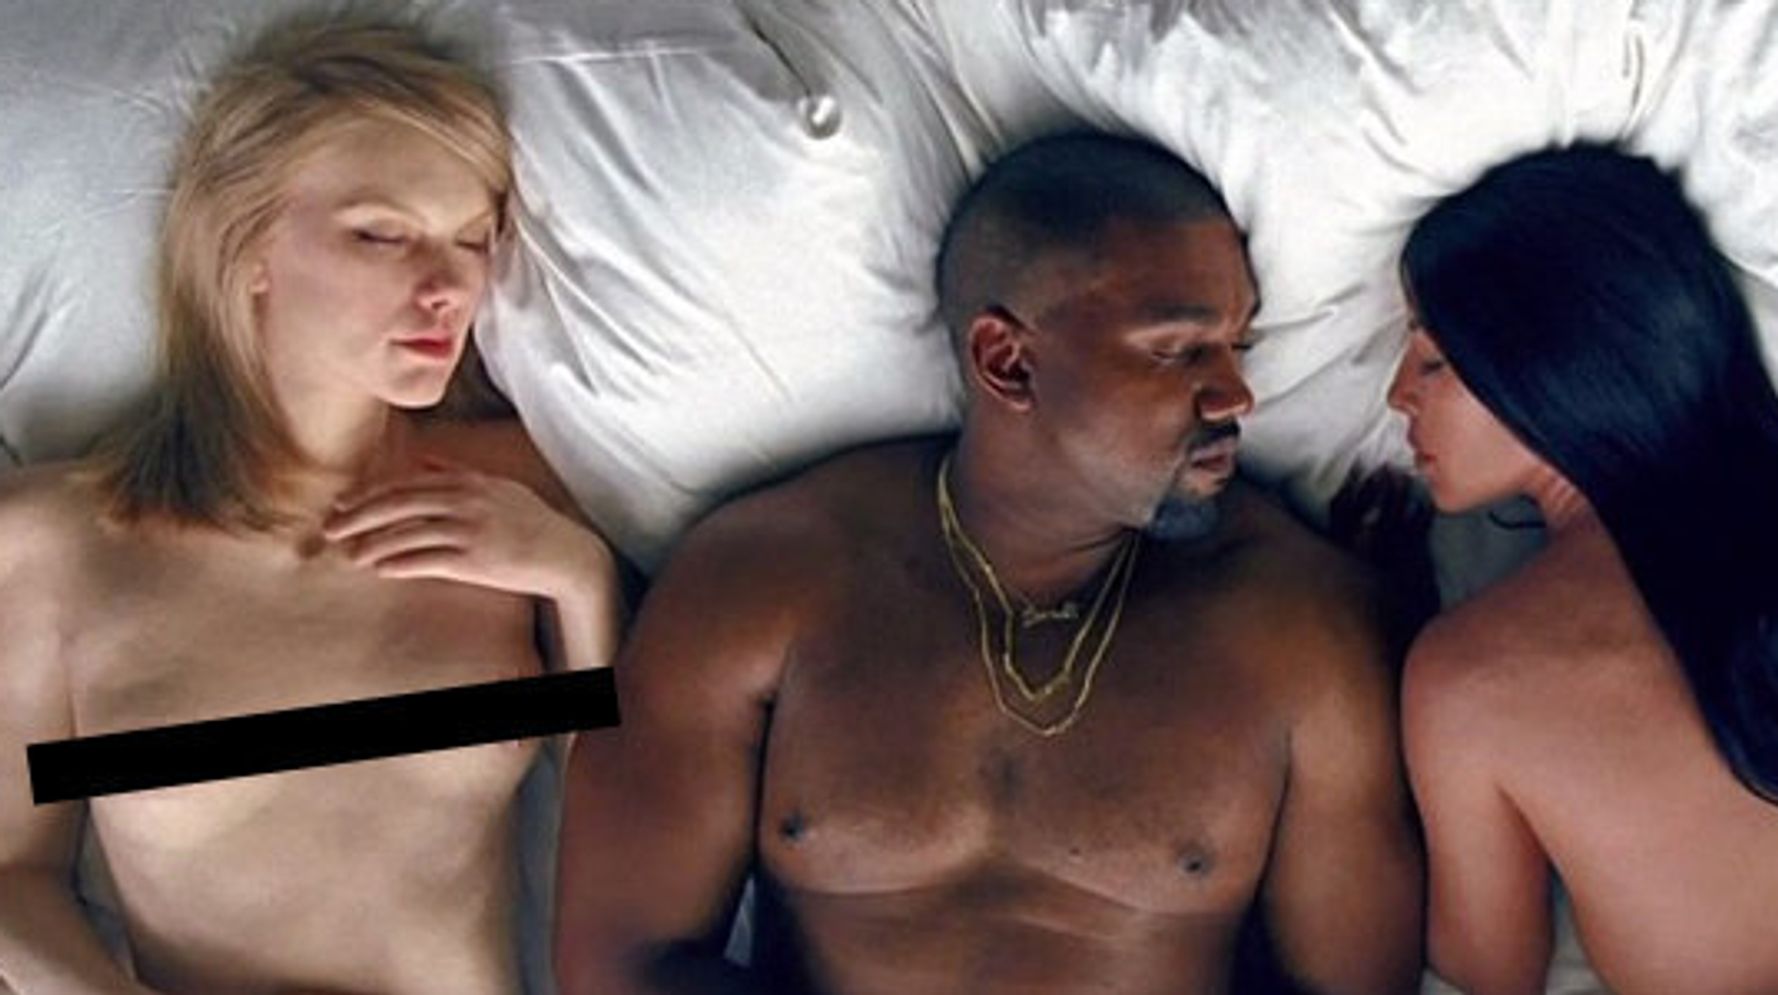 Taylor Swift Sex Black - Kanye West's 'Famous' Video Features A Naked Taylor Swift, Kim Kardashian  And Donald Trump - But Who's Real? | HuffPost UK Entertainment